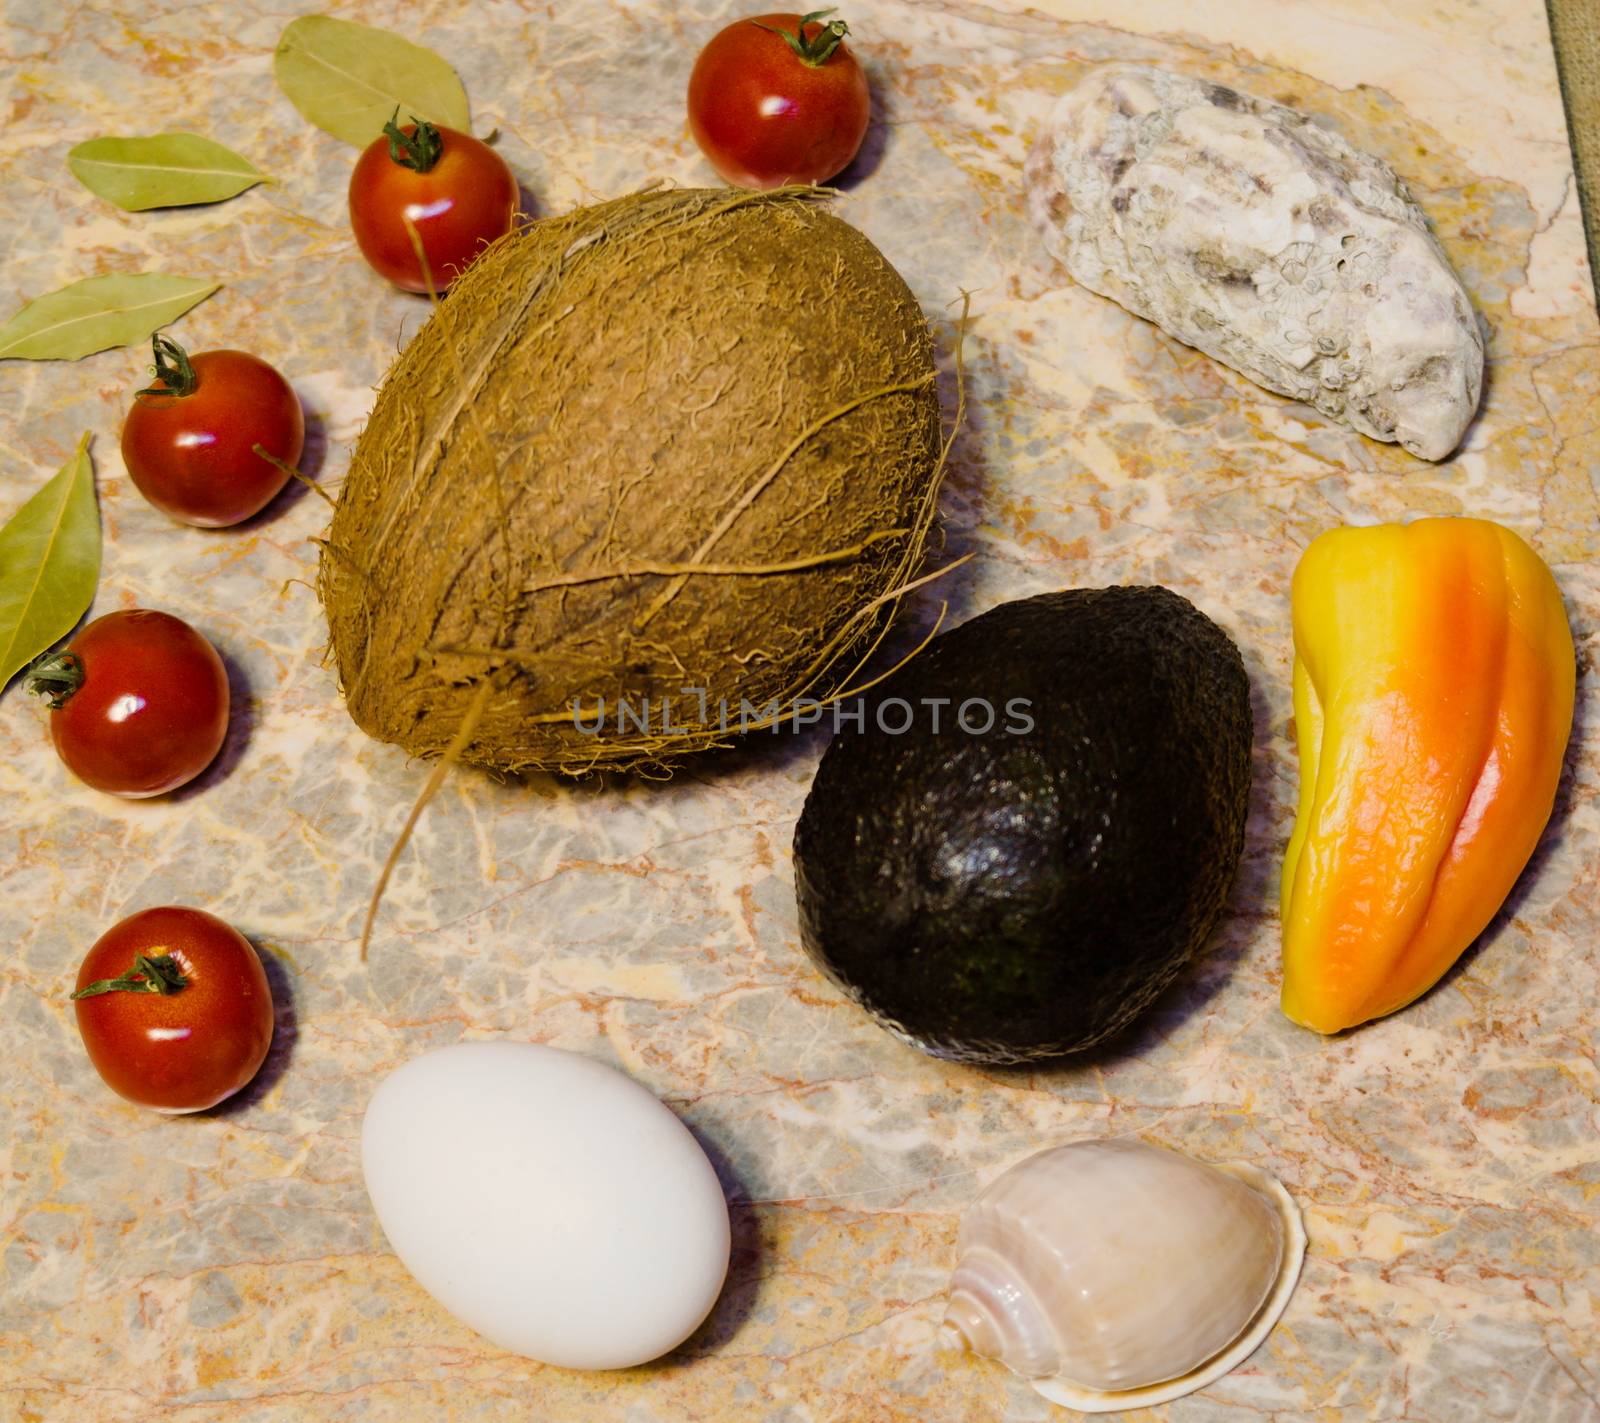 vegetables, fruits, seashells and an egg on a marble surface: cherry tomatoes, bell peppers, bay leaves, oyster, shell, avocado, coconut and chicken egg